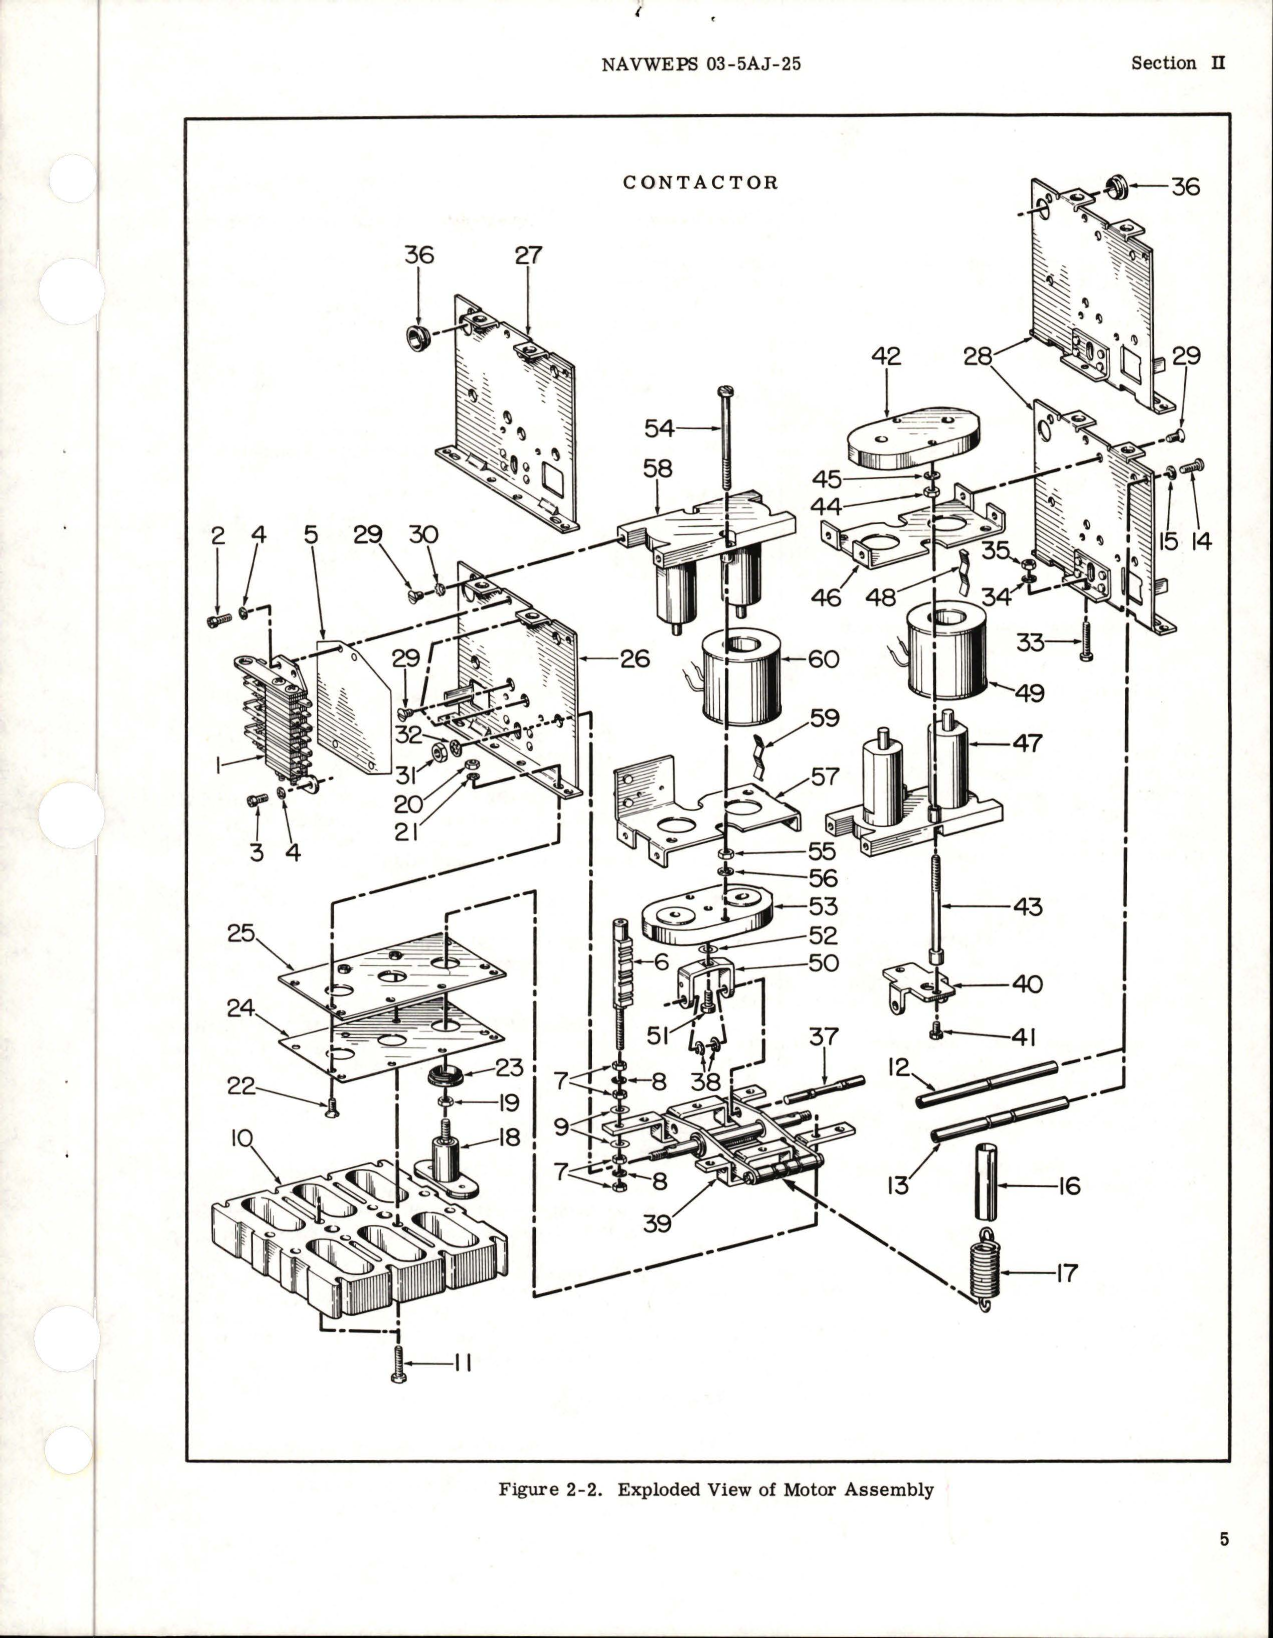 Sample page 9 from AirCorps Library document: Overhaul Instructions for Contactor - Model B-123B and B-123J